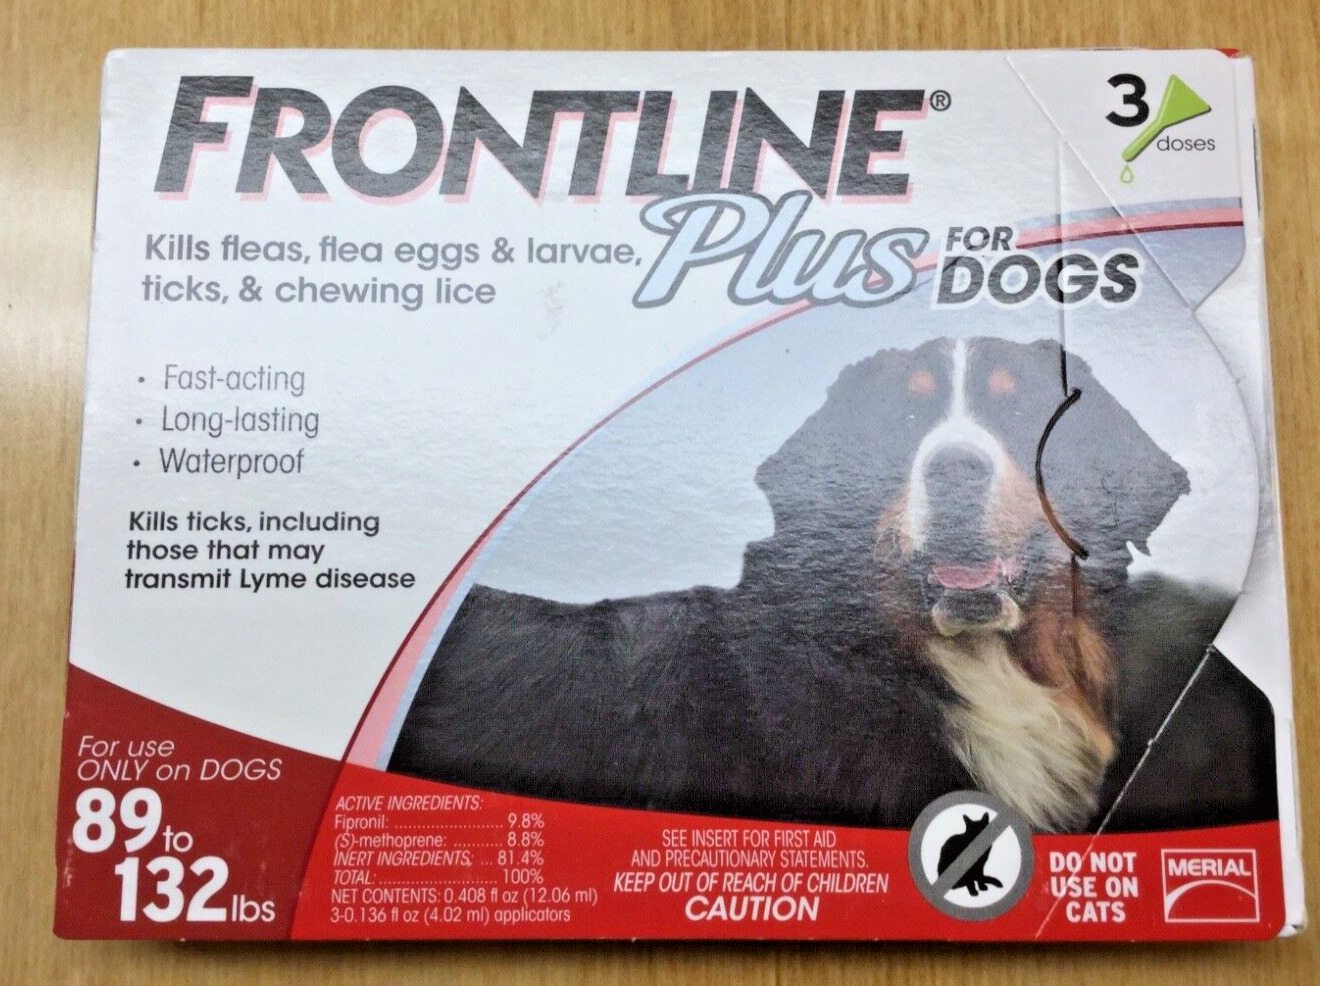 Frontline plus for dogs 89 to 132 lbs. 100 % Genuine U.S Epa. Approved (3 Doses)